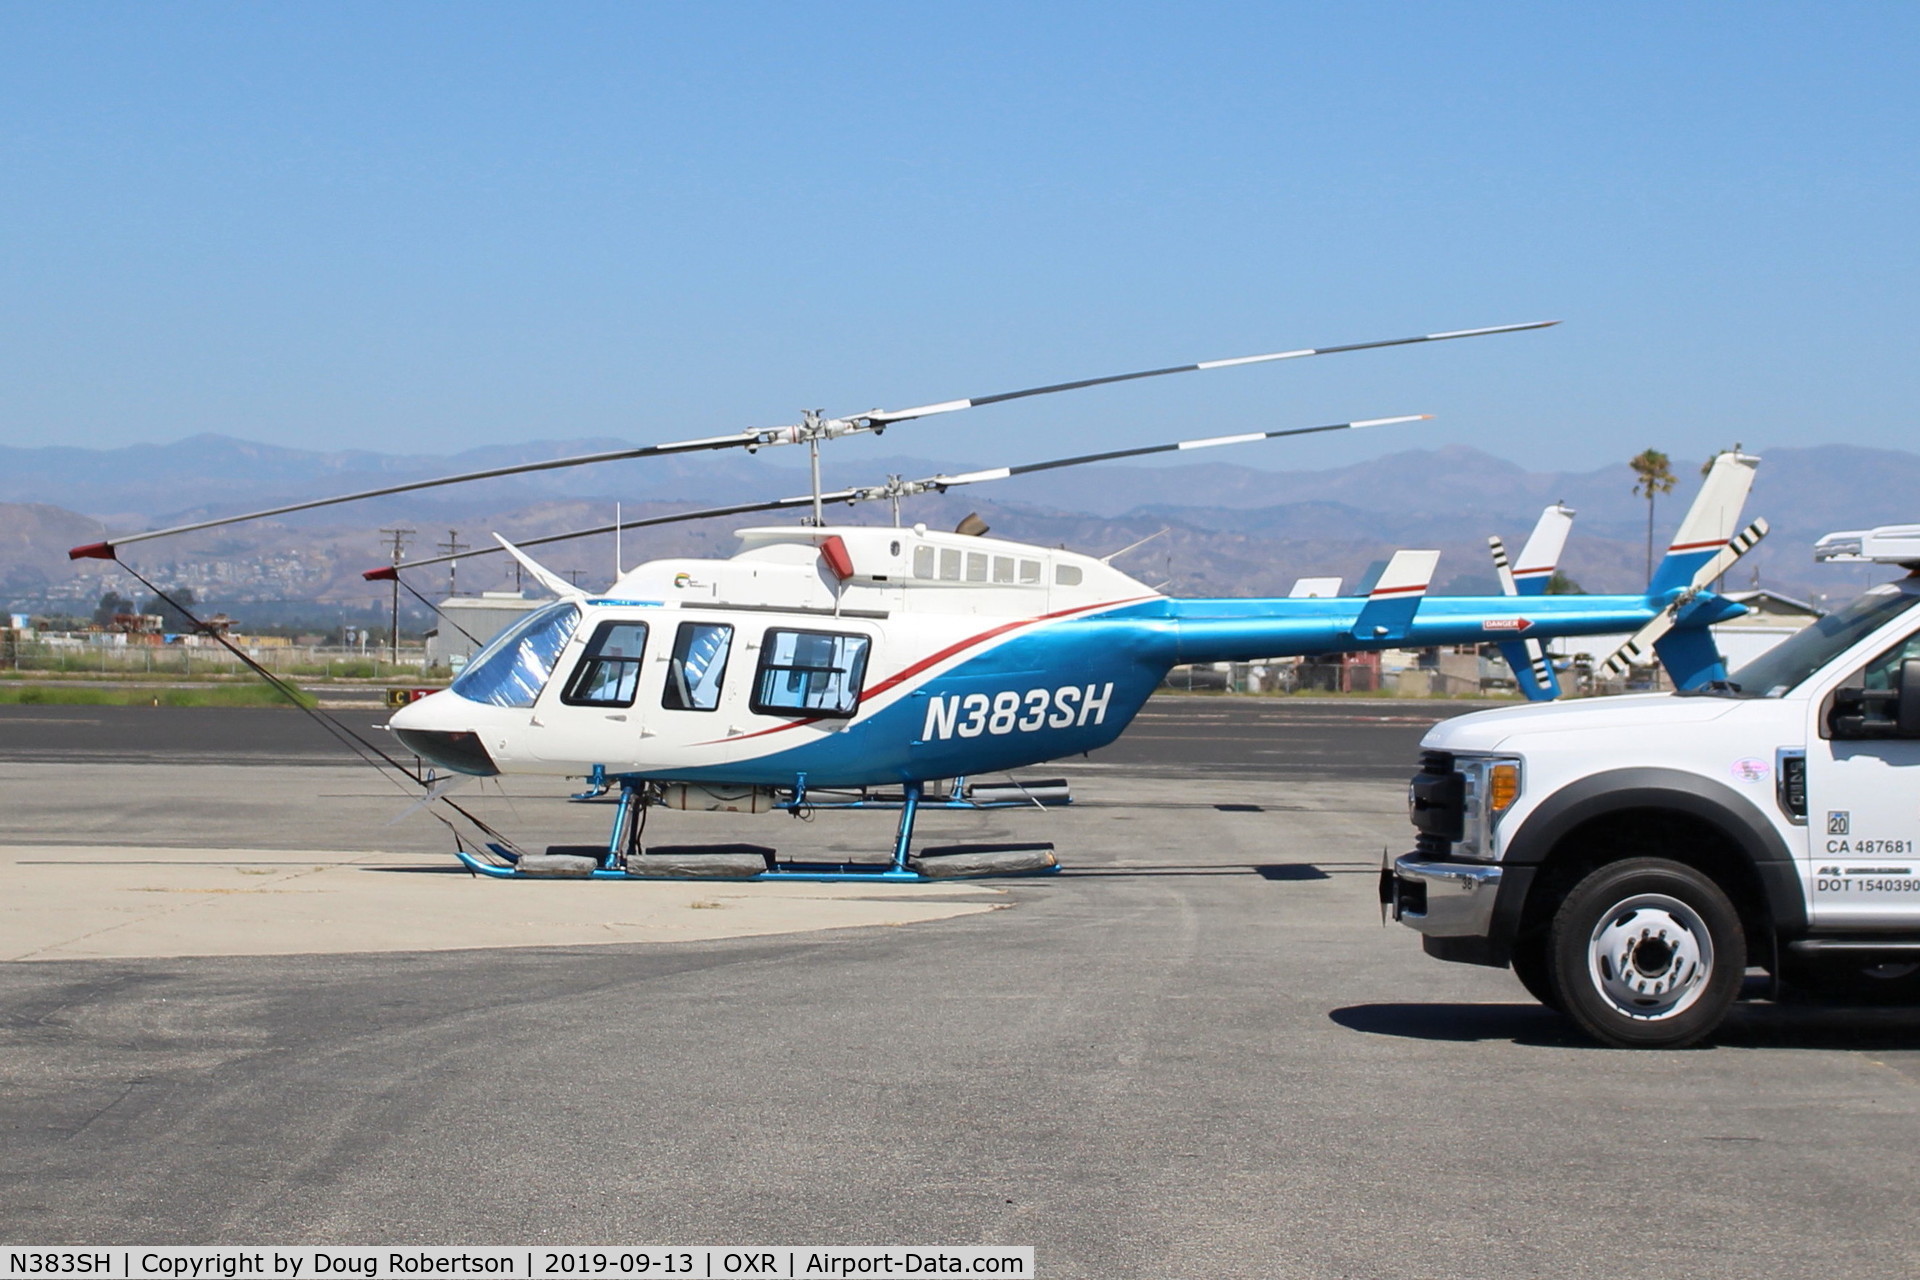 N383SH, 1983 Bell 206L-3 LongRanger III C/N 51073, 1983 BELL 206L-3 LongRanger III, one Allison 250 C30-P 650 SHp Turbo-Shaft, of ASPEN HELICOPTERS. NOTE-There is a second helicopter beyond it, accounting for the extra rotor blades and tails.